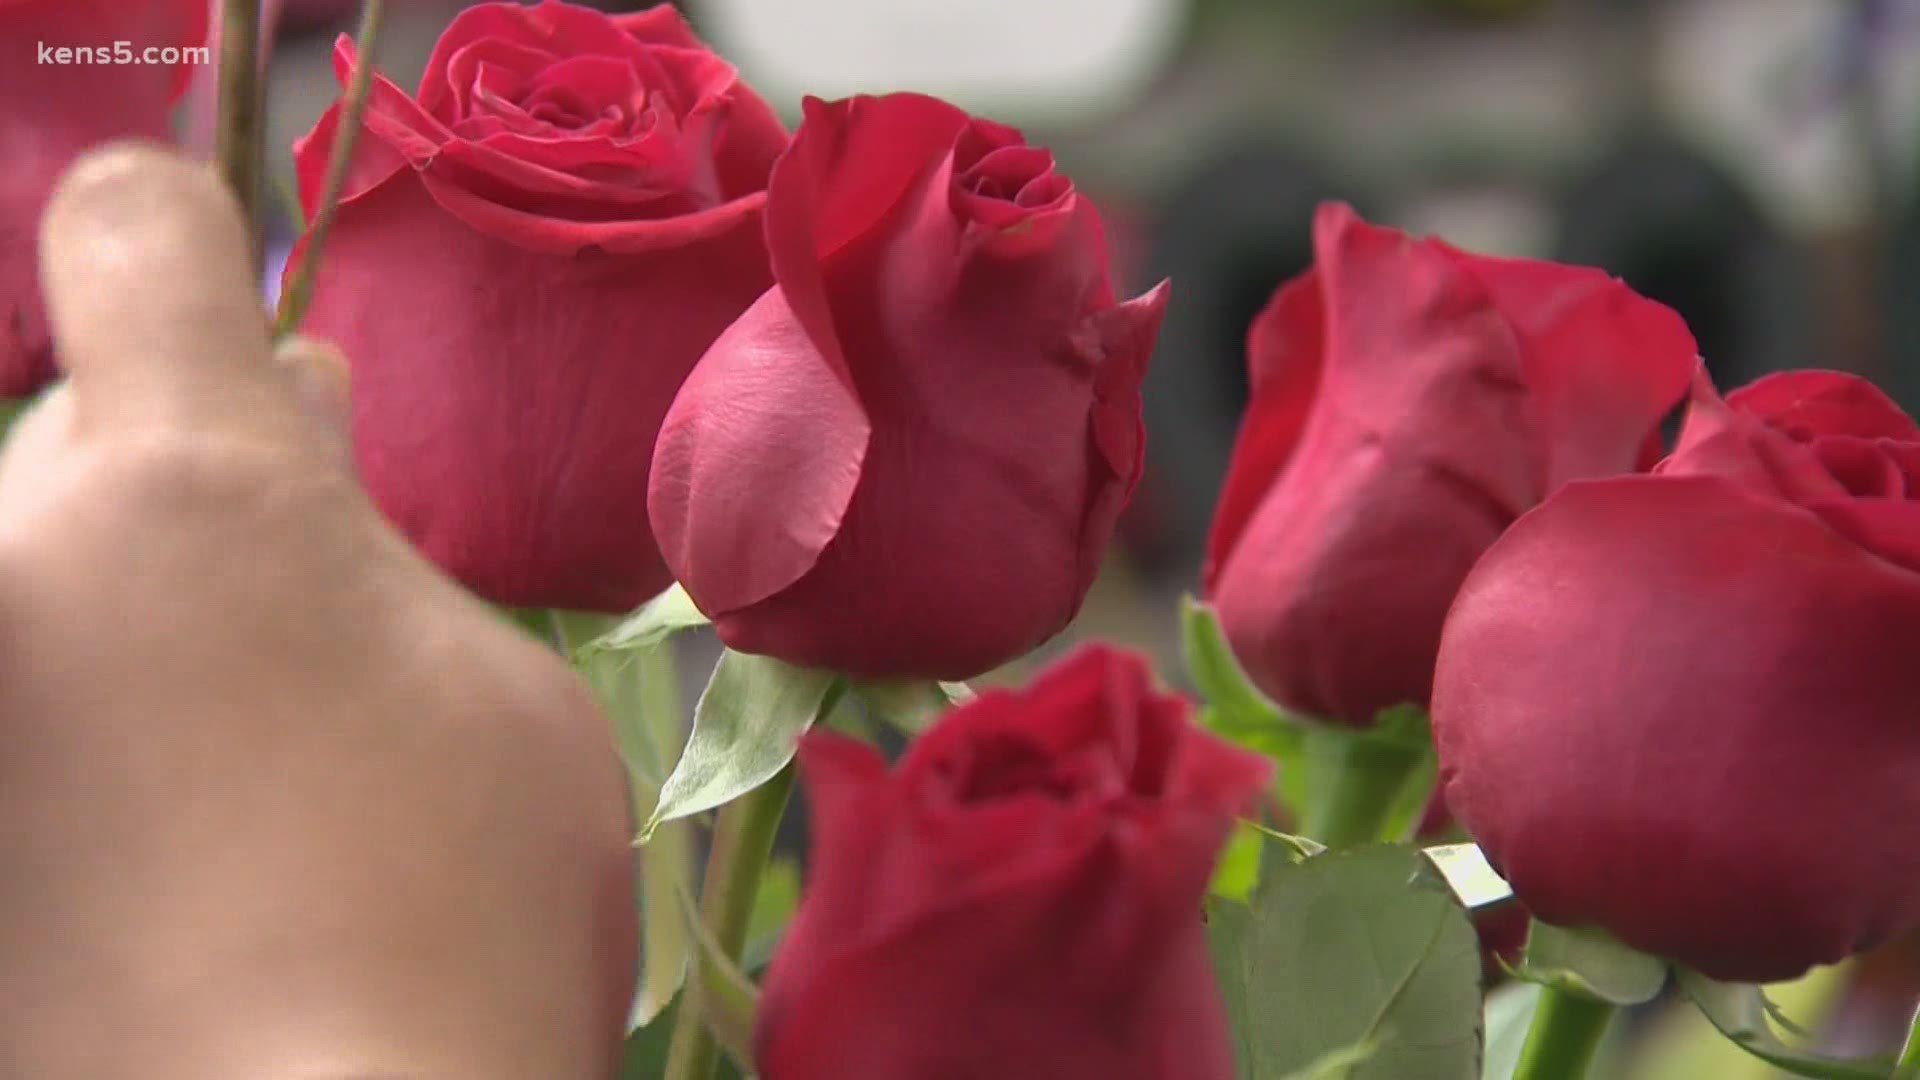 Delivery drivers are bracing for the winter weather as they drop off flowers and food for Valentine's Day. Will the artic air freeze your delivery?